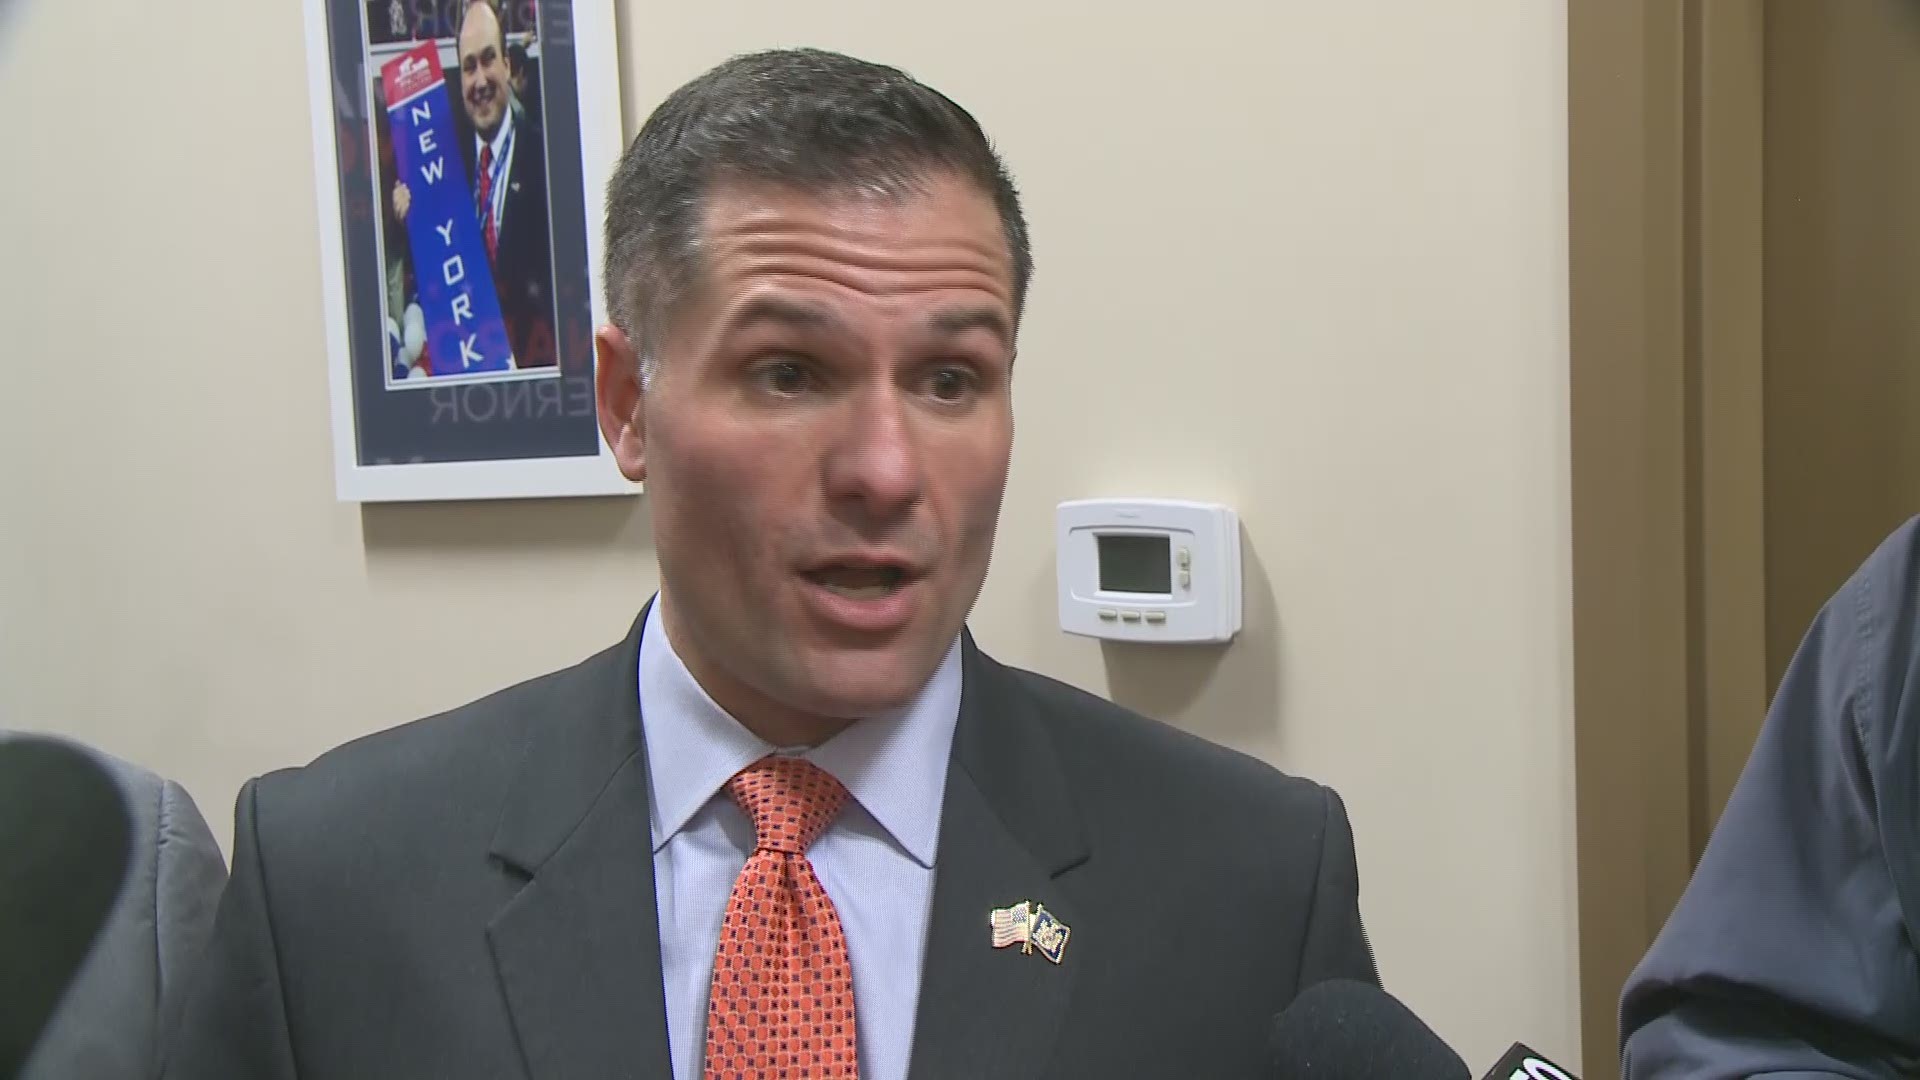 Marc Molinaro was in Buffalo Wednesday, and we had a change to ask some tough questions.